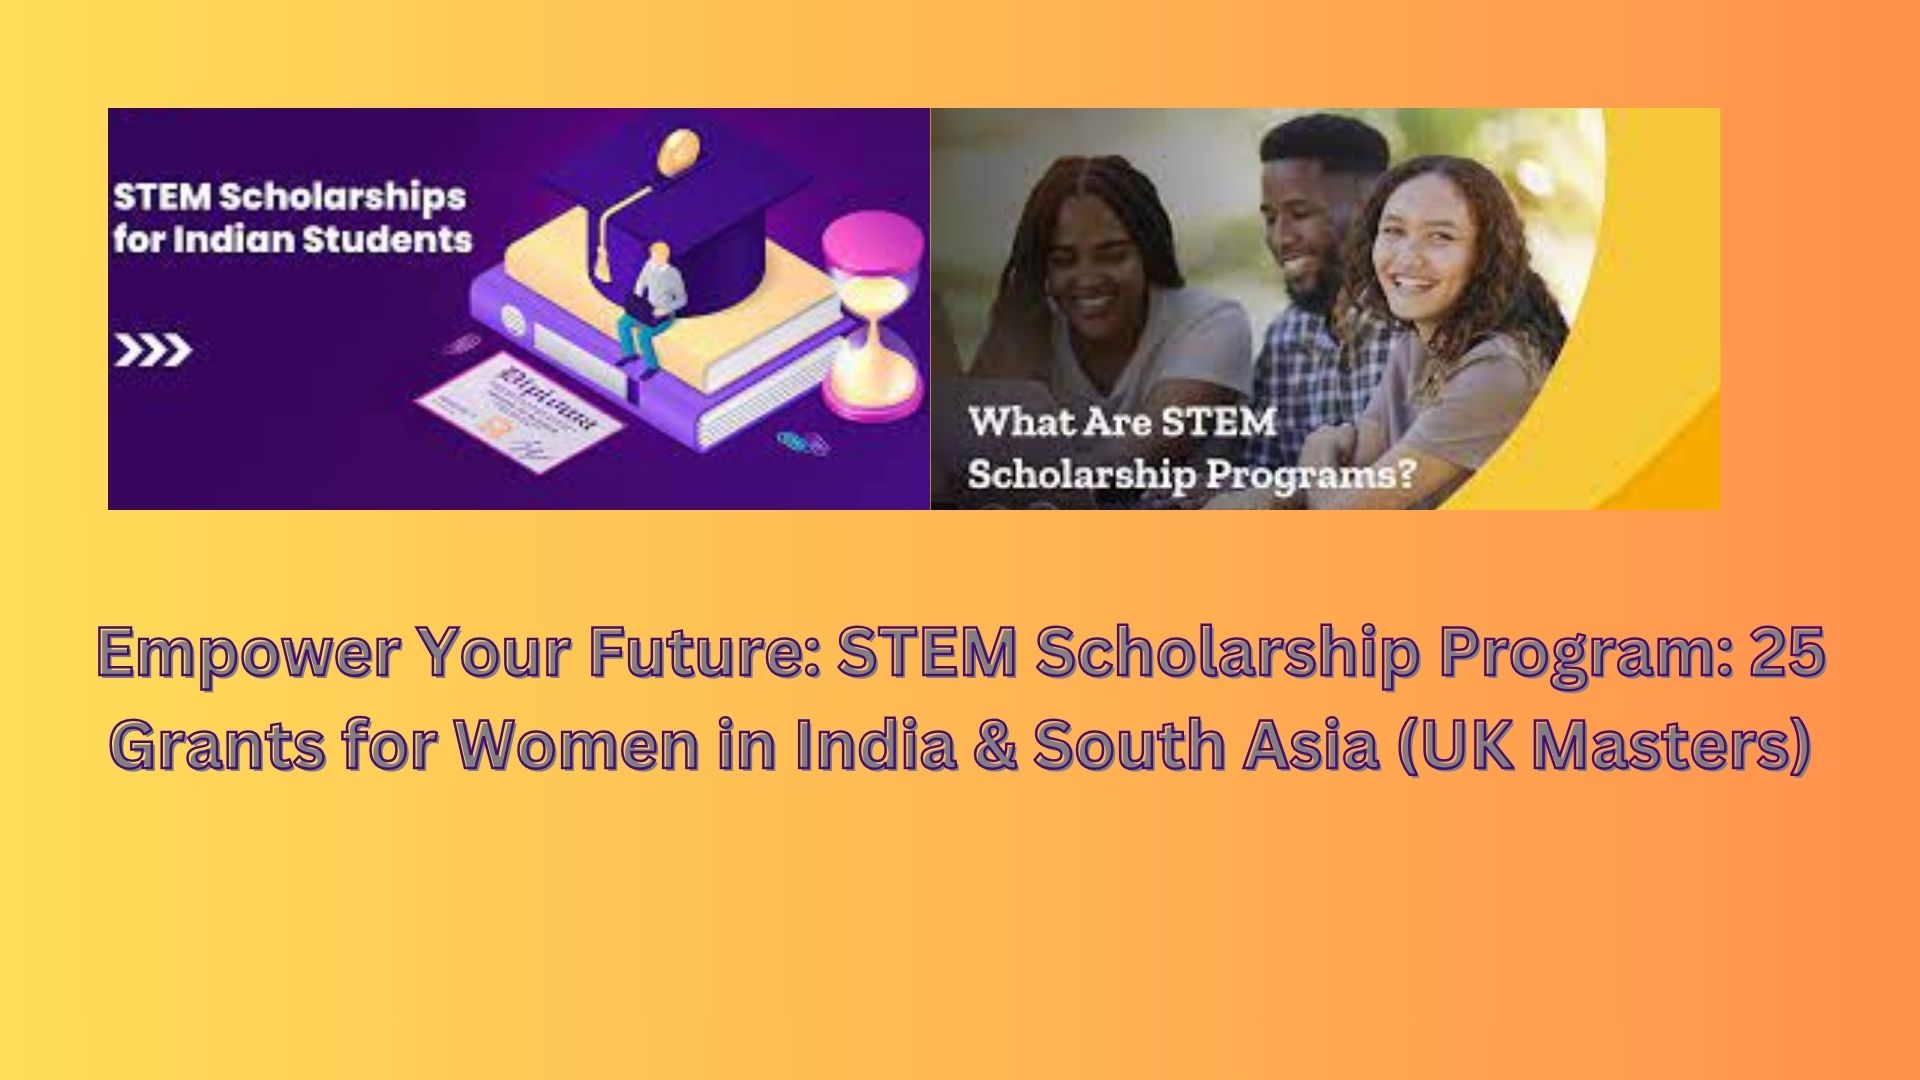 Empower Your Future: STEM Scholarship Program: 25 Grants for Women in India & South Asia (UK Masters)